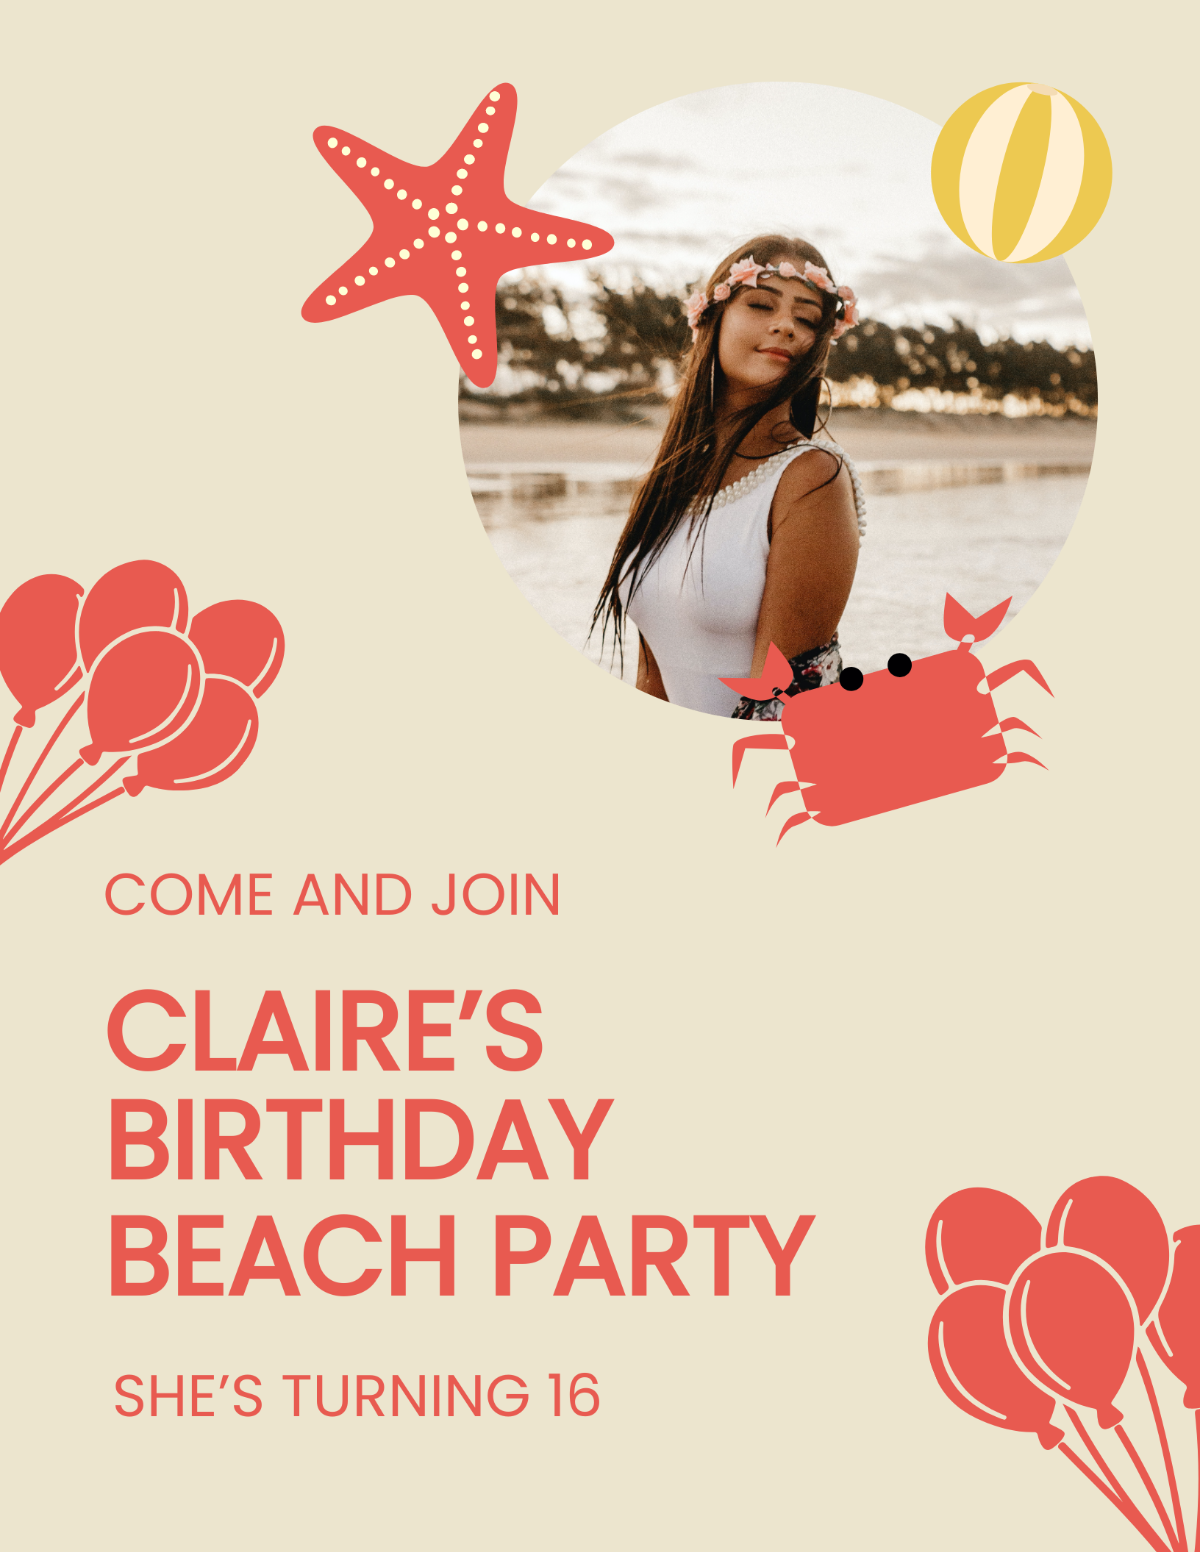 Free Birthday Beach Party Flyer Template